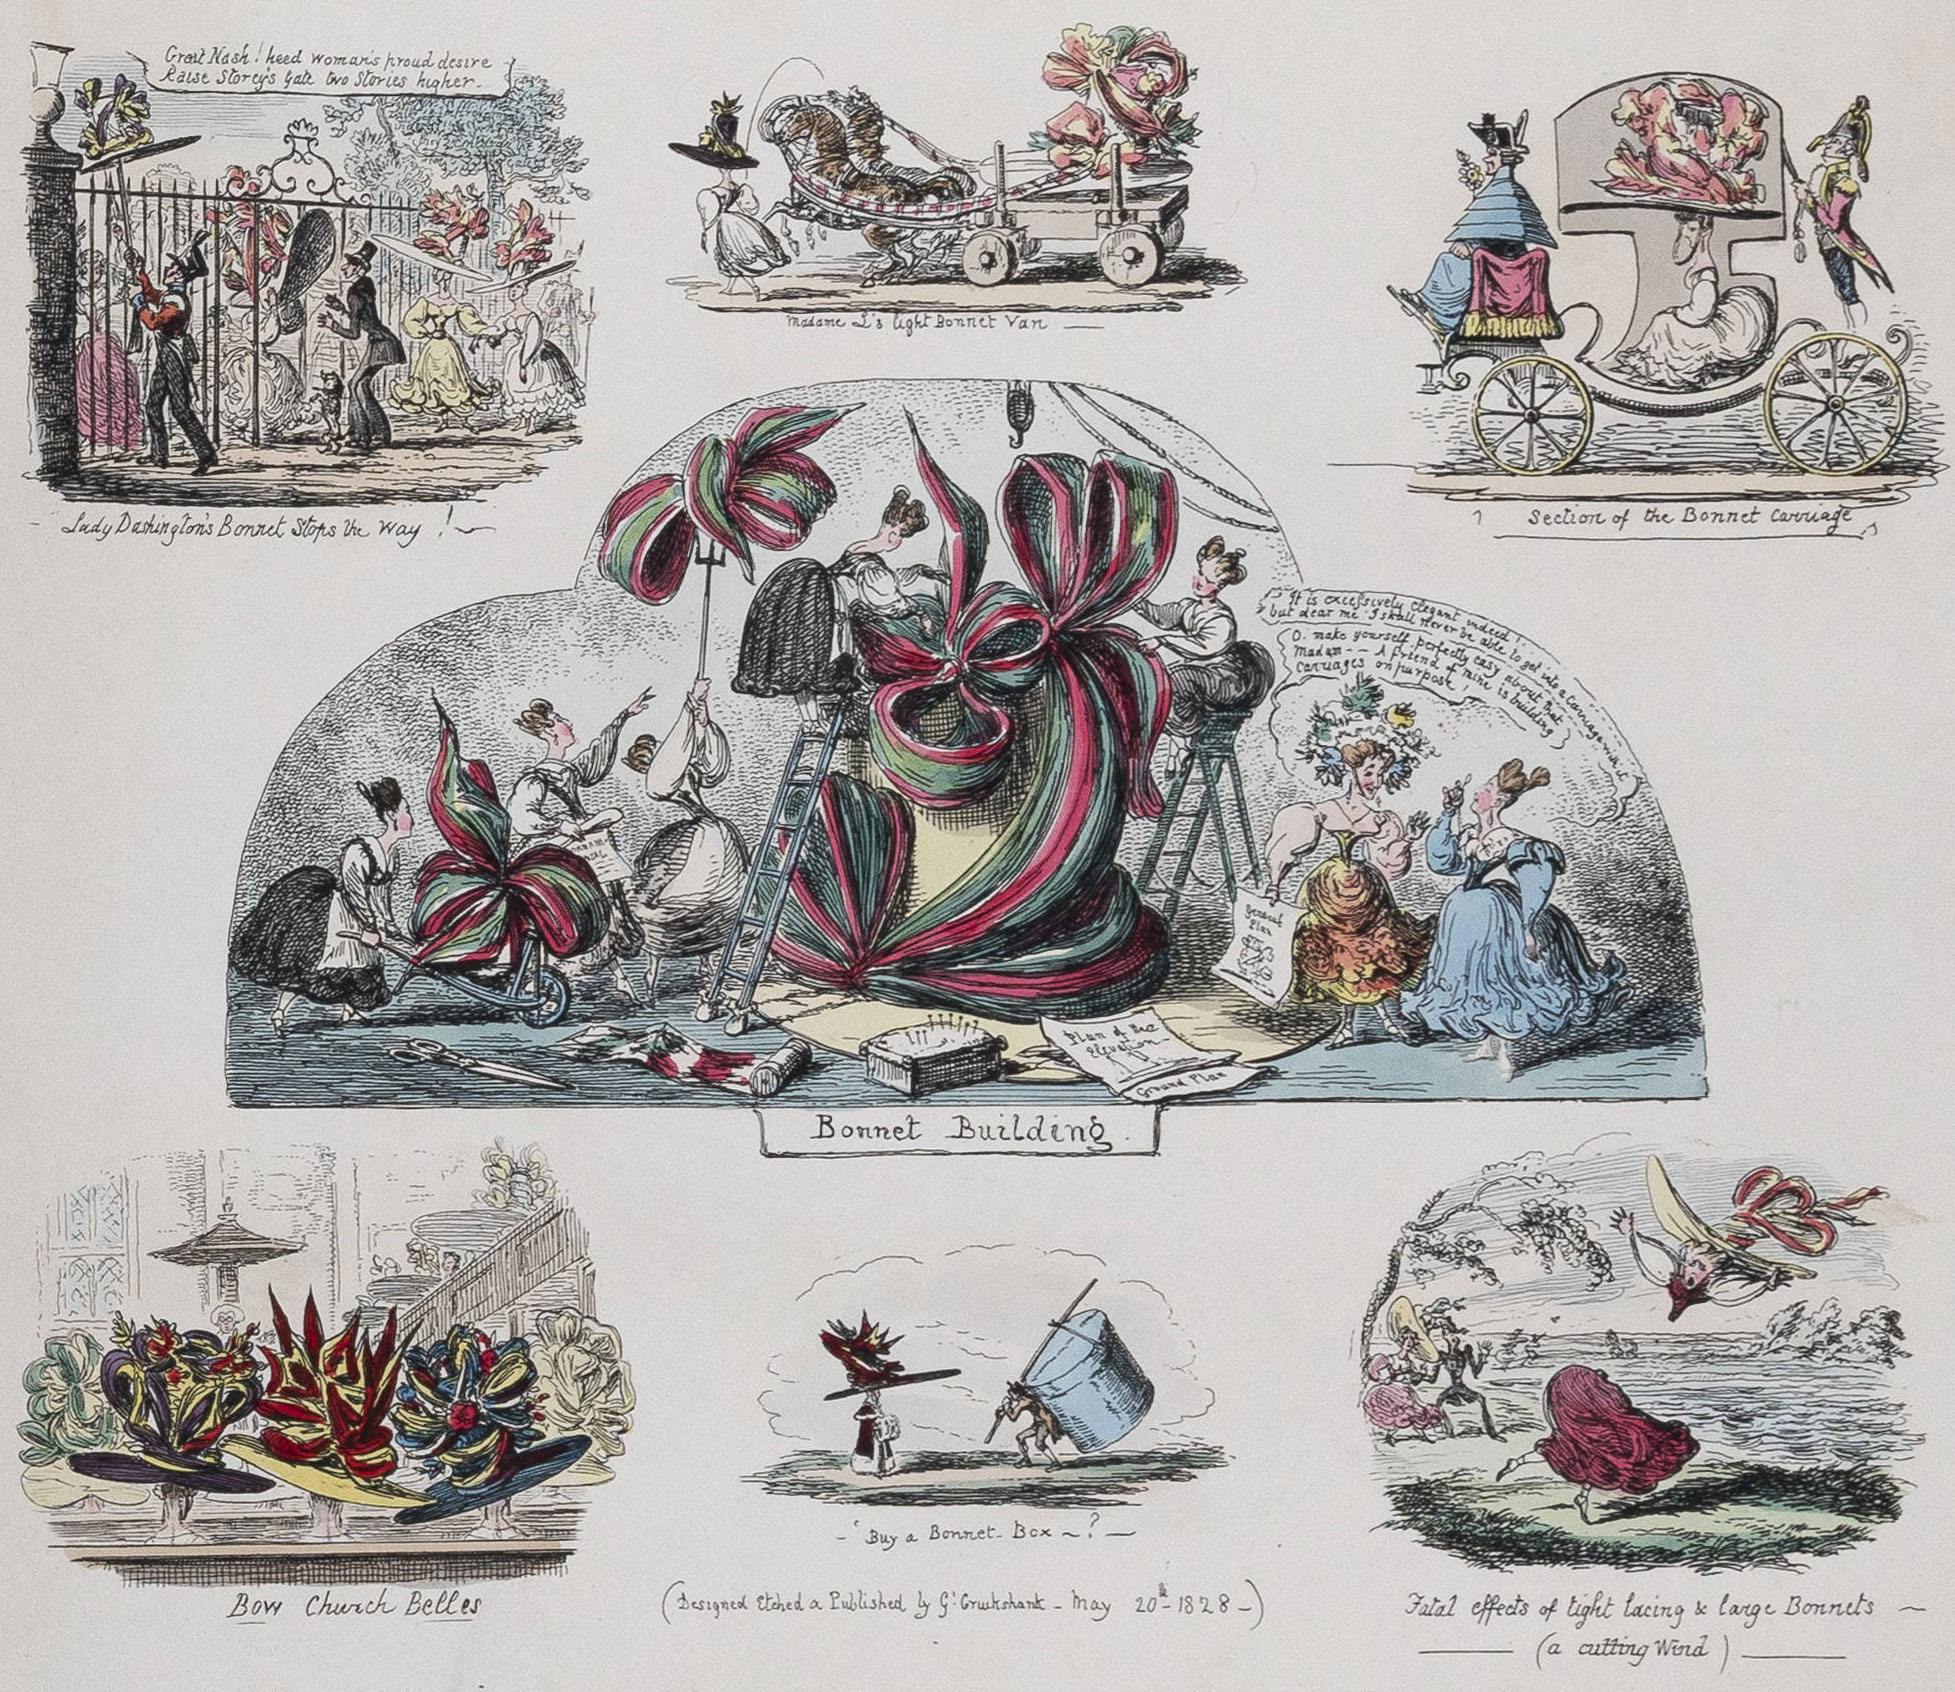 A set of color sketches with people building an elaborate bonnet with red and green ribbon in the center. The bonnet is much larger than the people building it. 